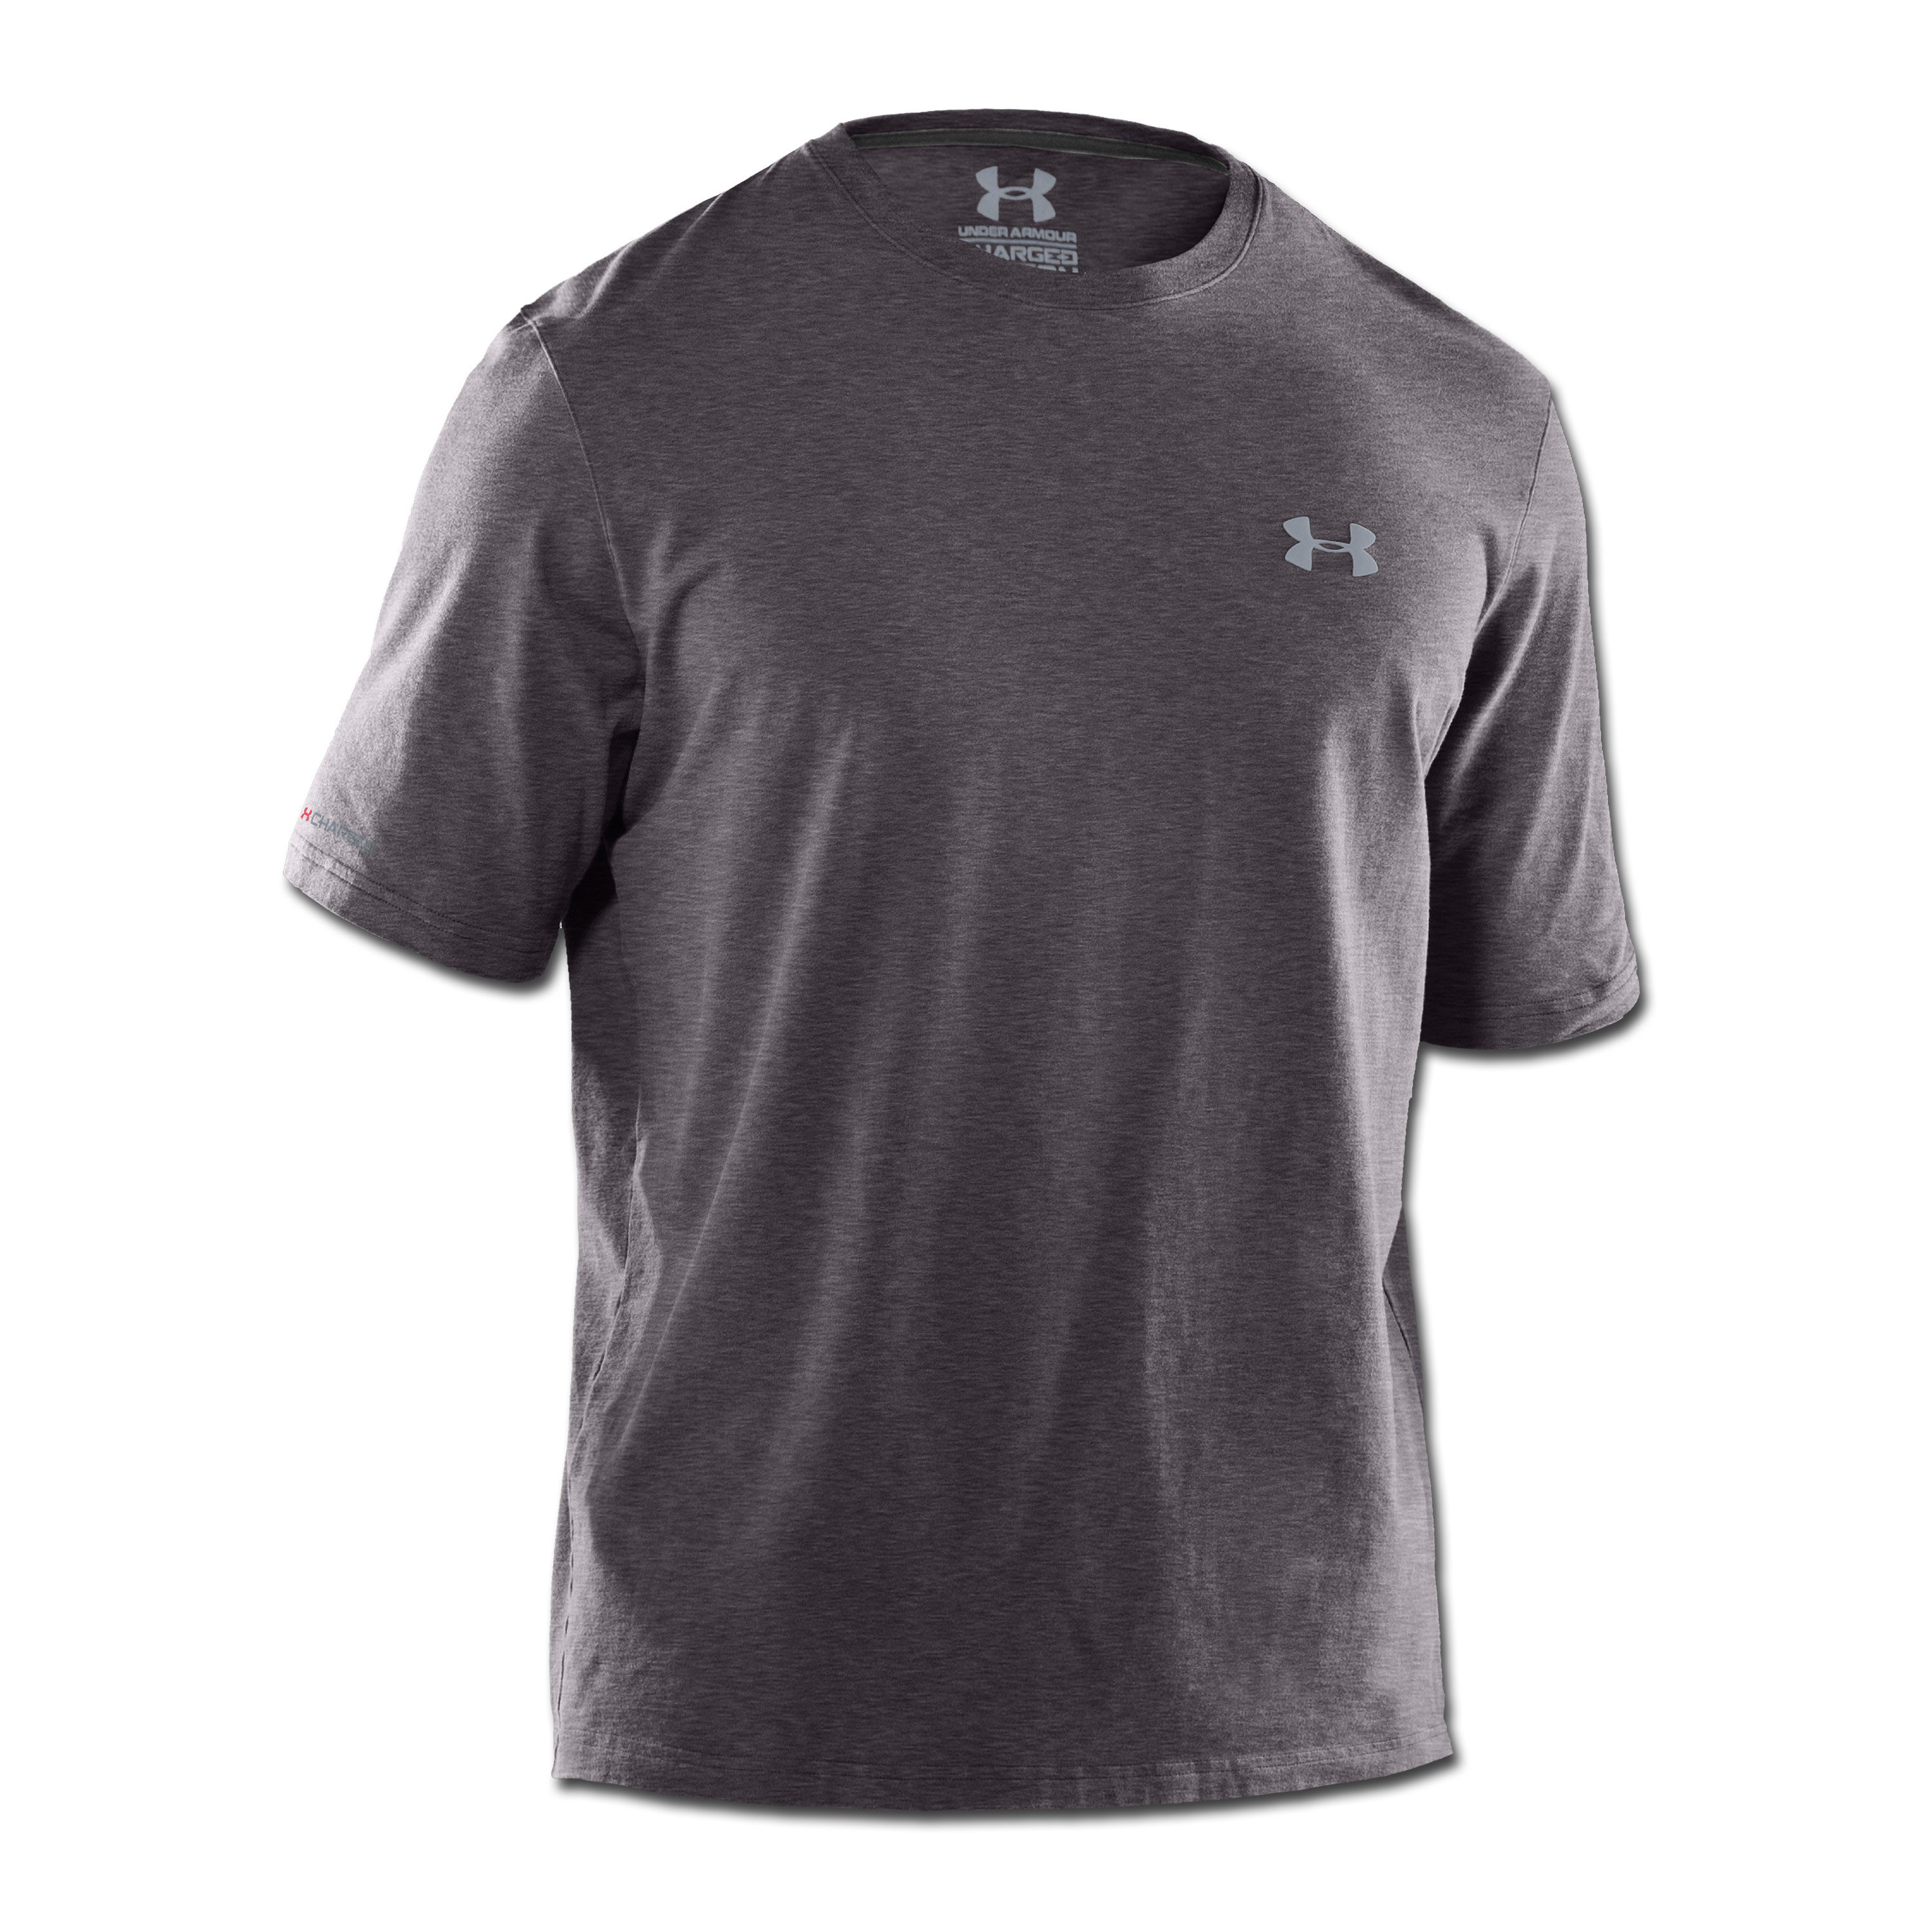 Under Armour HeatGear T-Shirt Charged Cotton charcoal-gray | Under ...